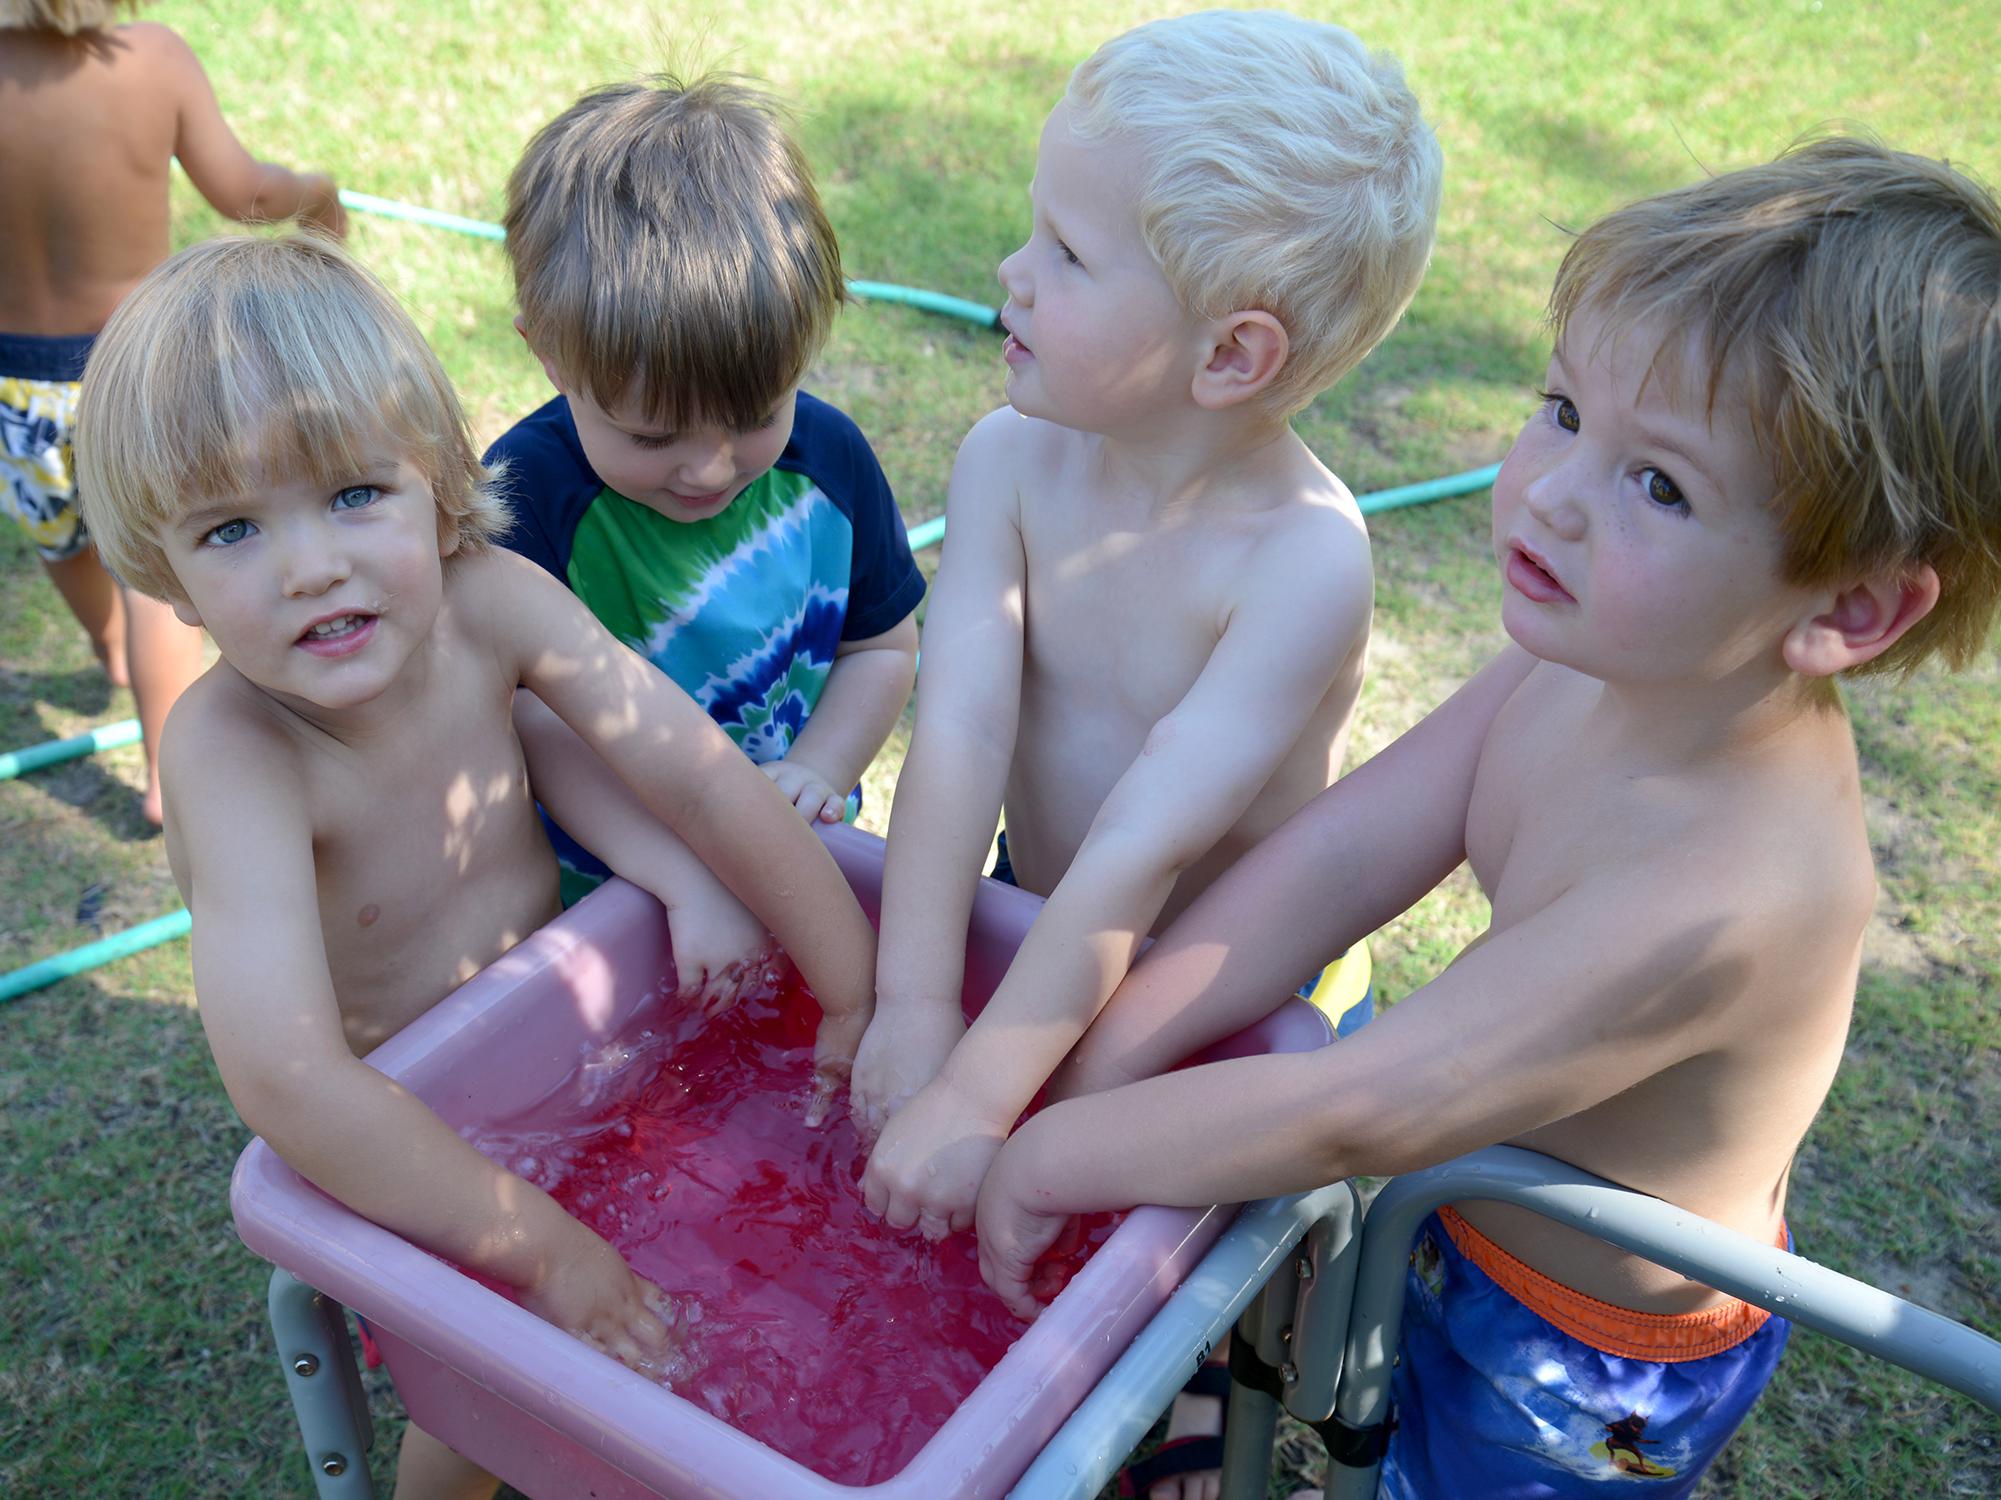 To avoid sunburn, young children should wear sunscreen and stay in the shade as much as possible when playing outside. (Photo by MSU Extension/Alexandra Woolbright)